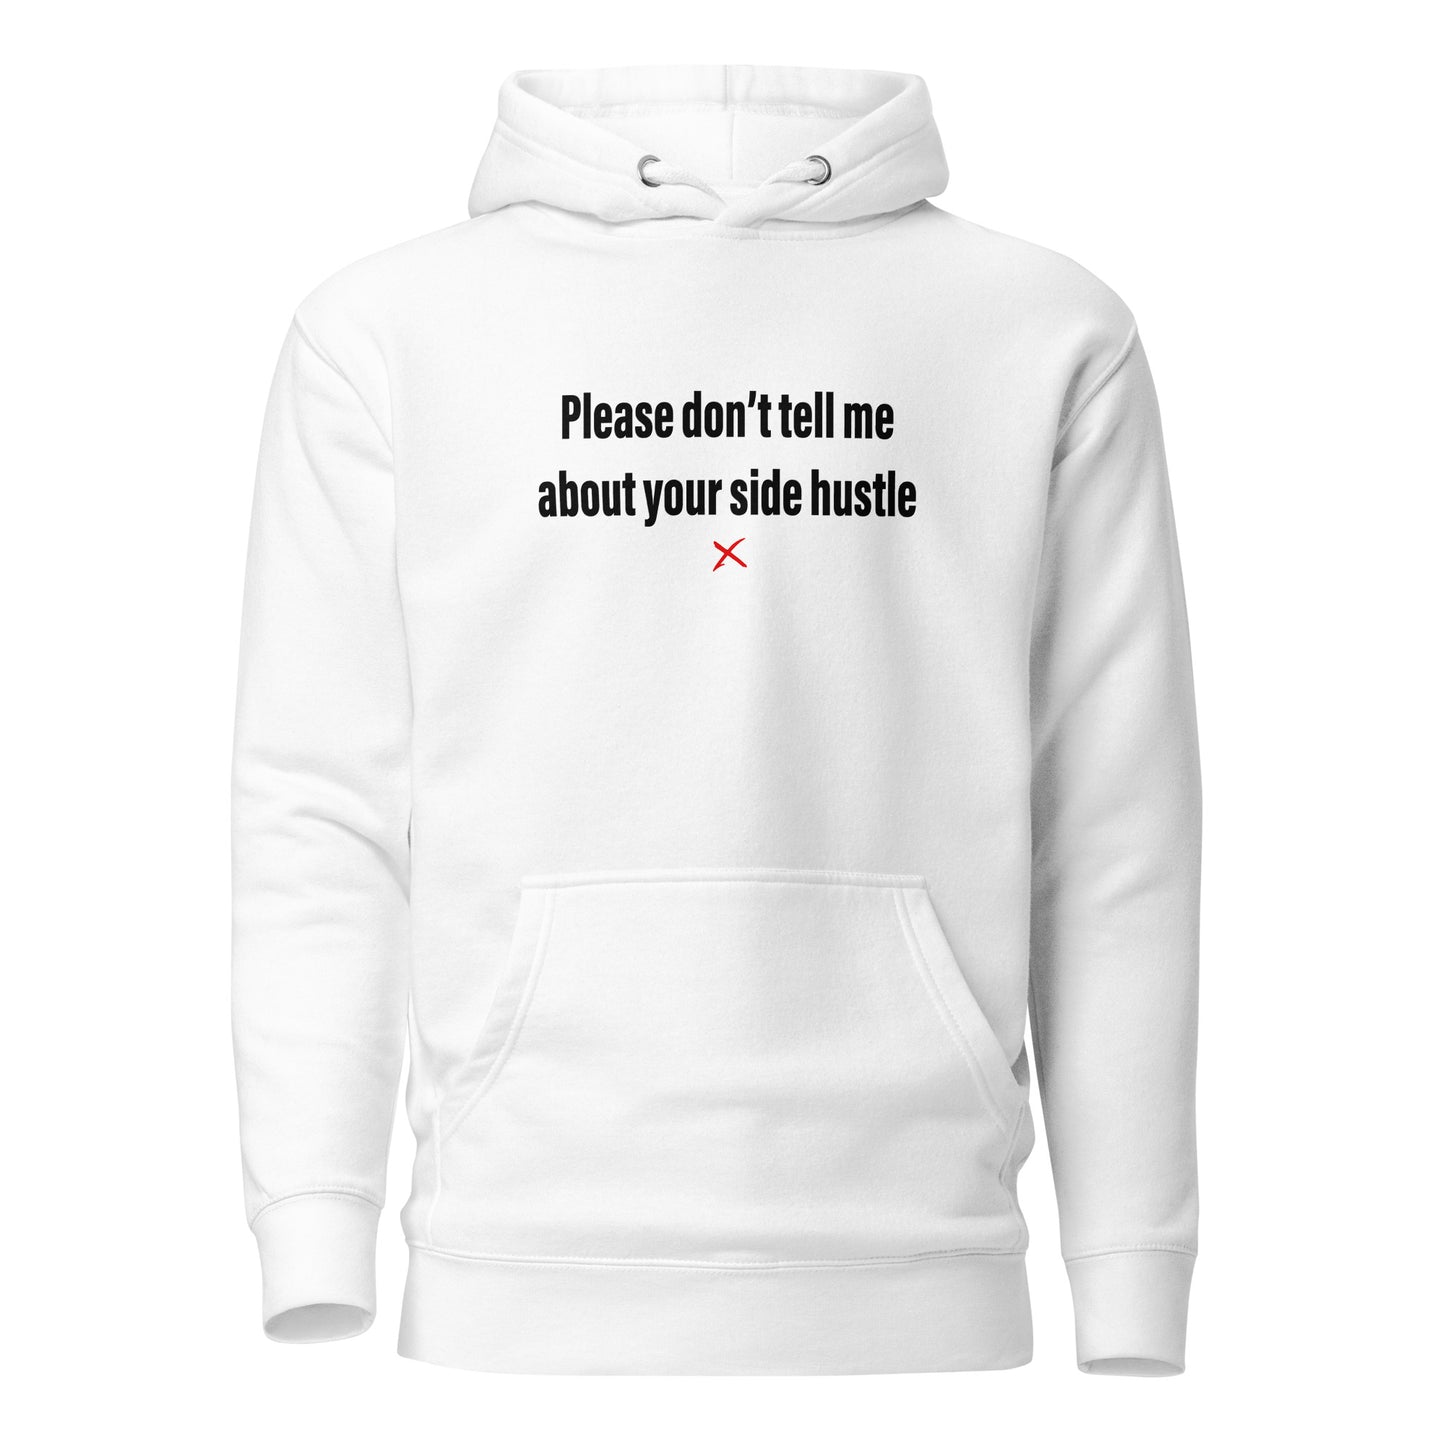 Please don't tell me about your side hustle - Hoodie